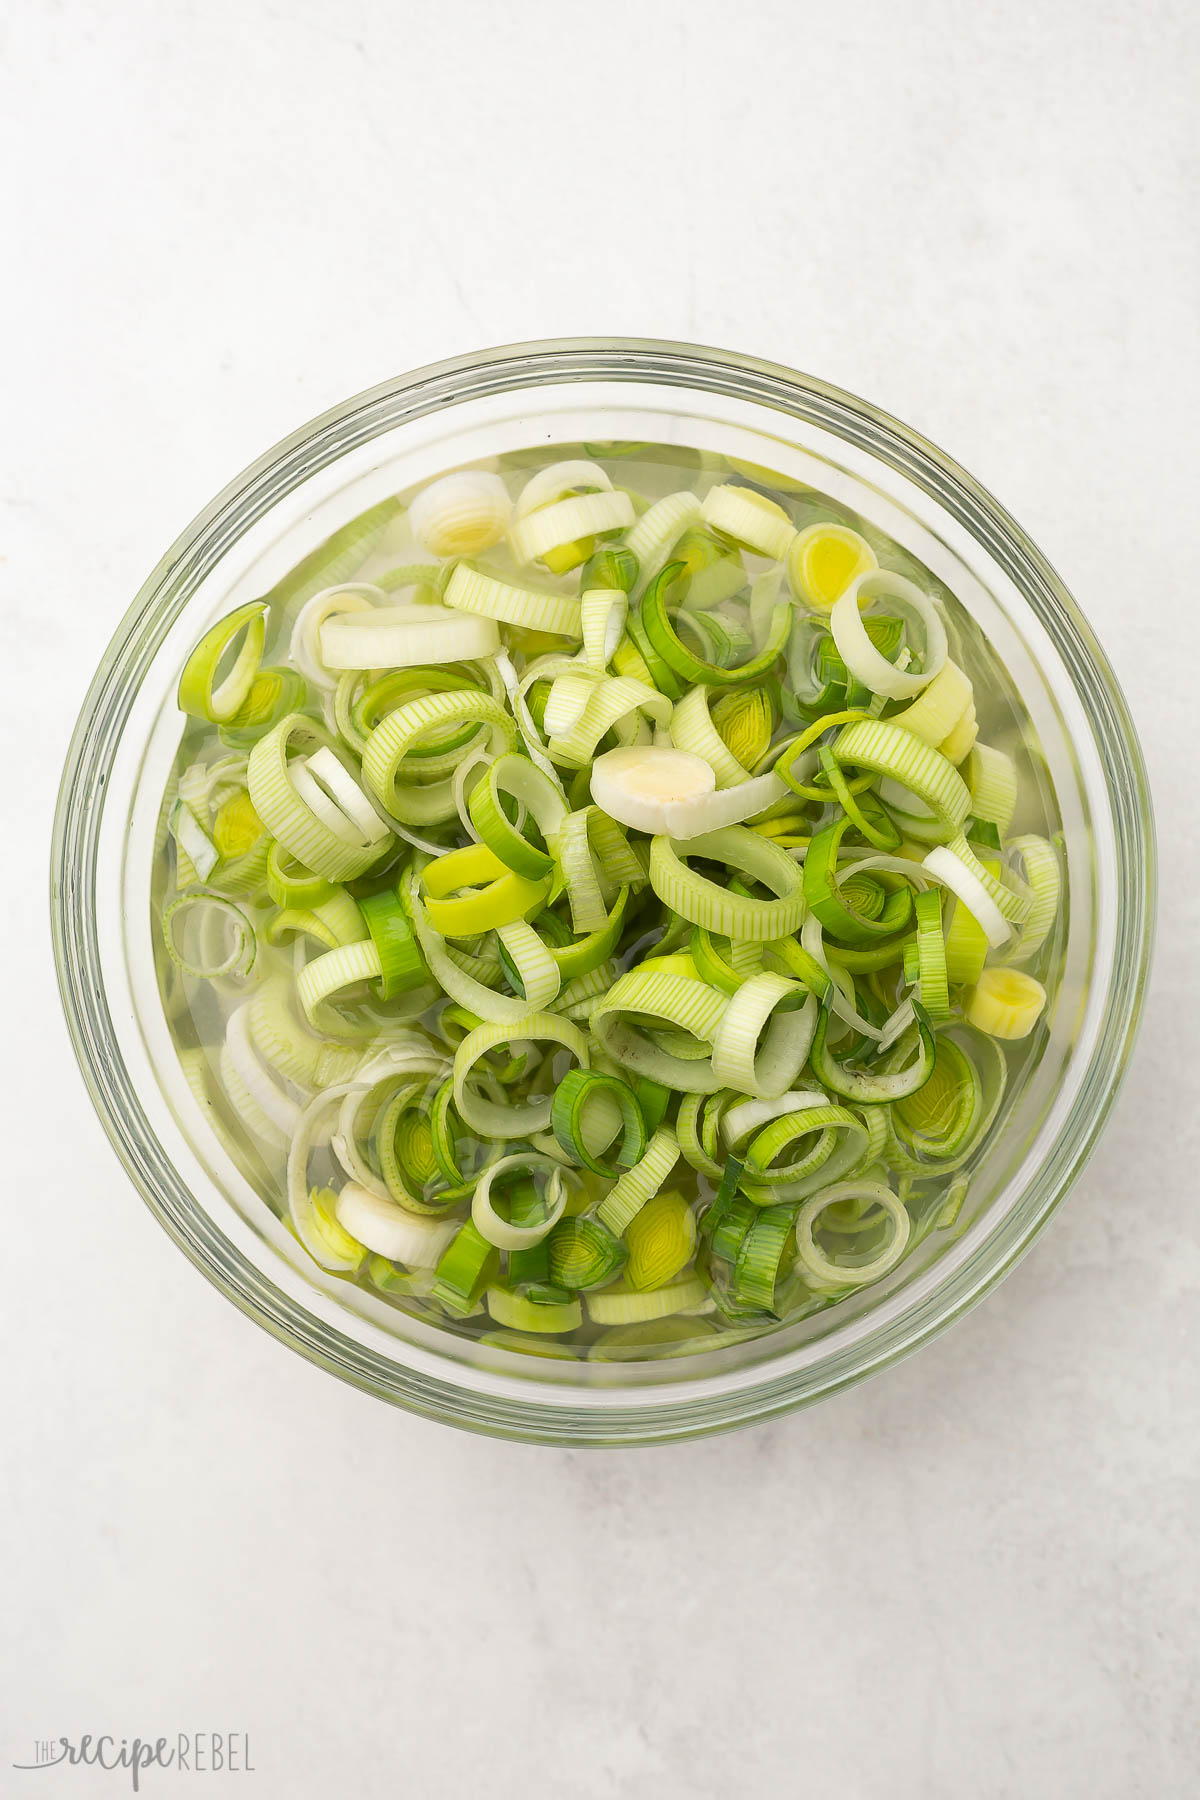 a glass bowl of chopped leeks on a grey surface.